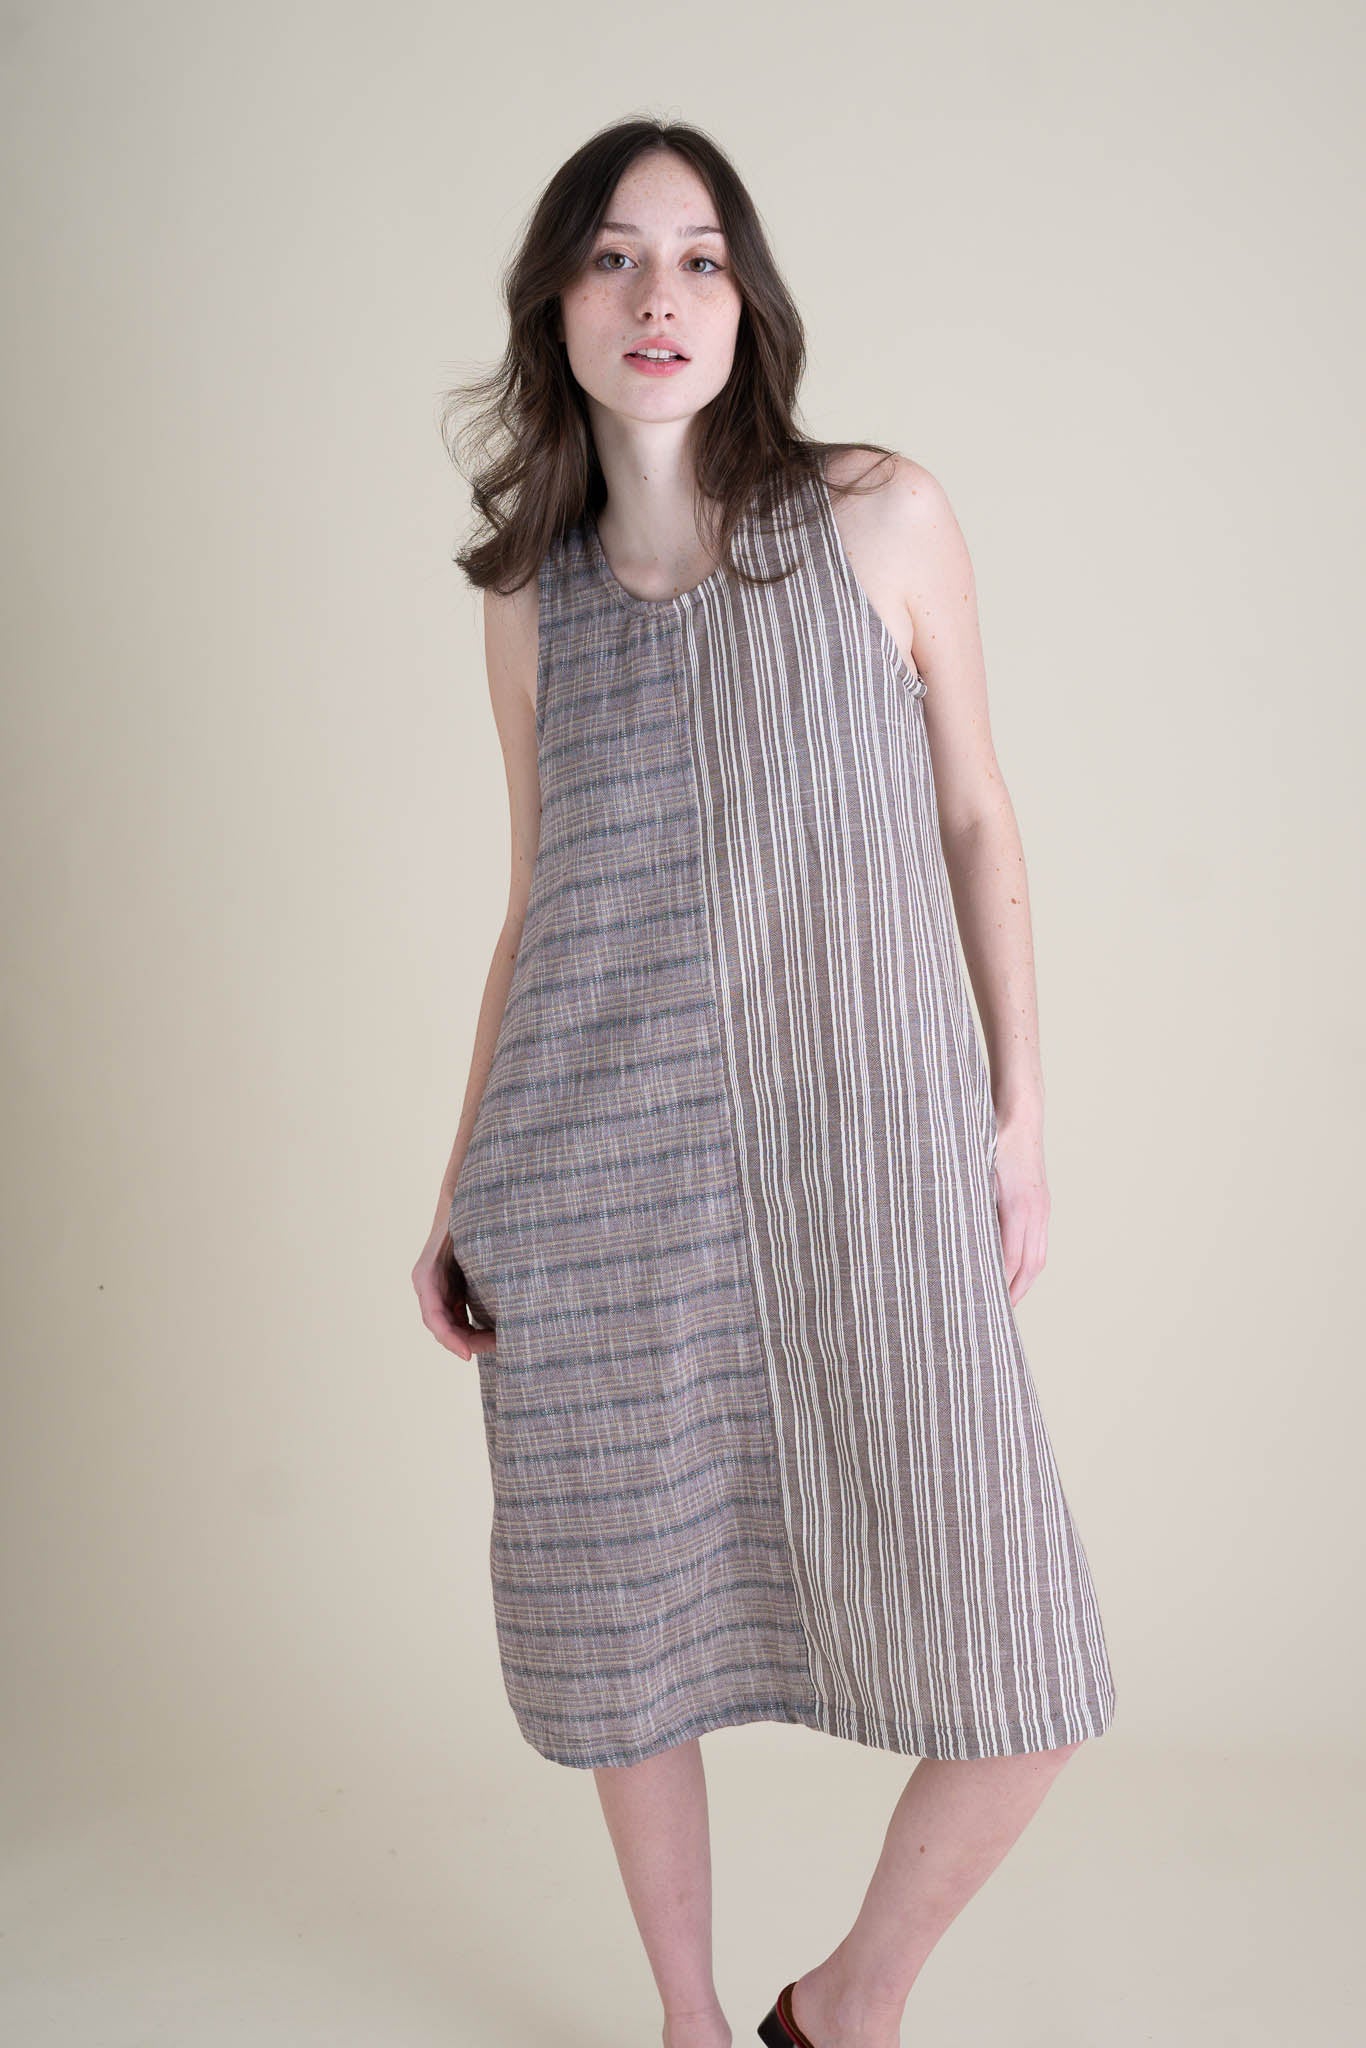 Dresses and Jumpsuits – Conscious Clothing